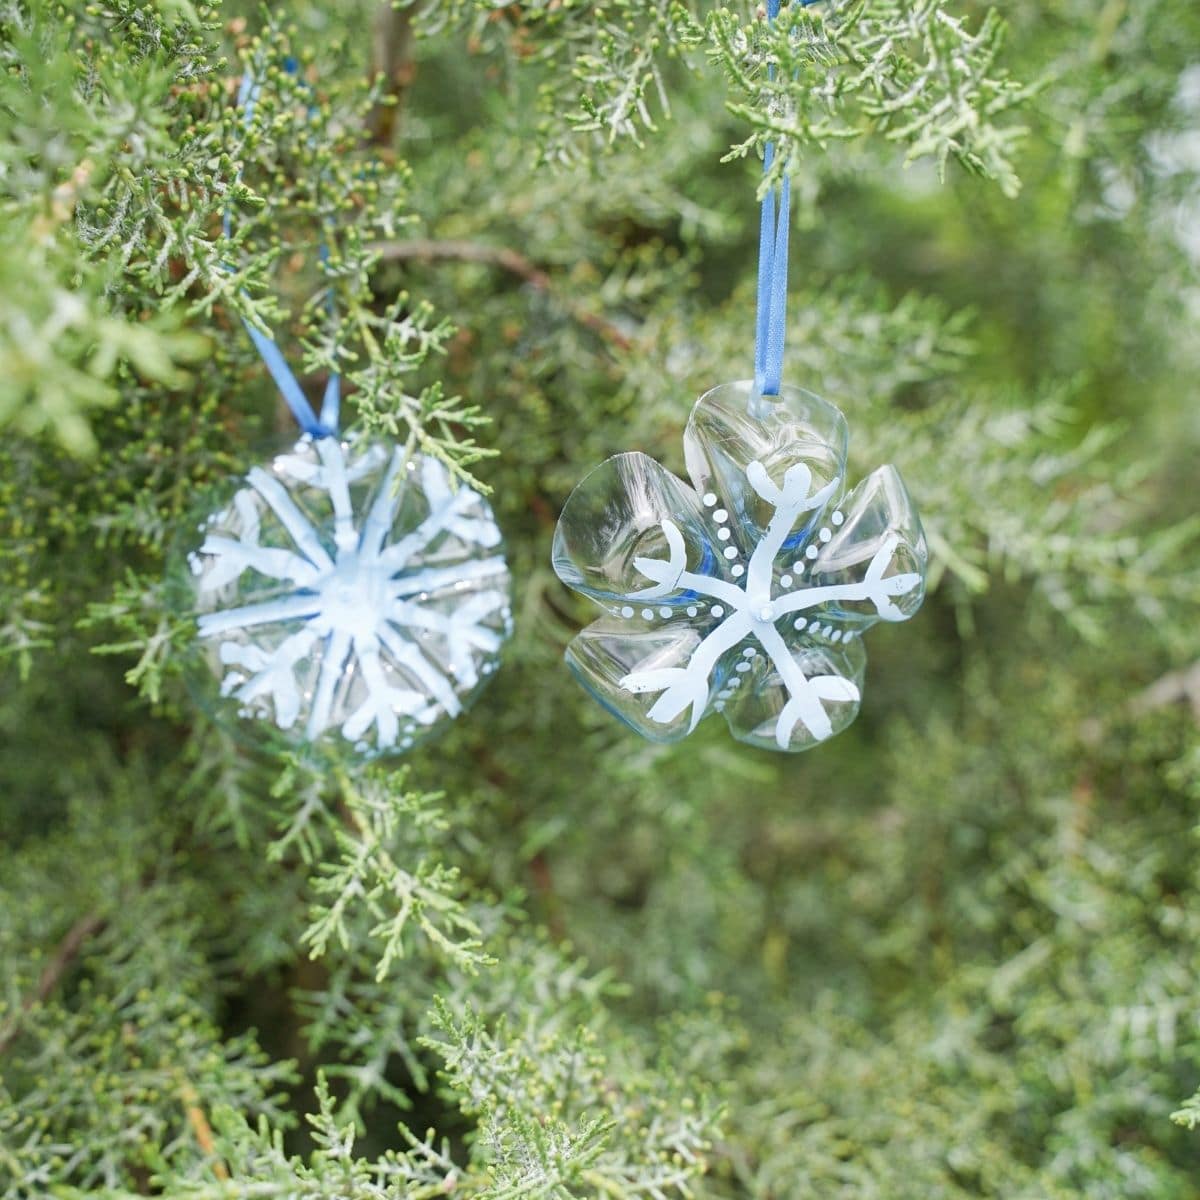 Stunning Snowflake Ornament from Upcycled Plastic Bottle - DIY & Crafts